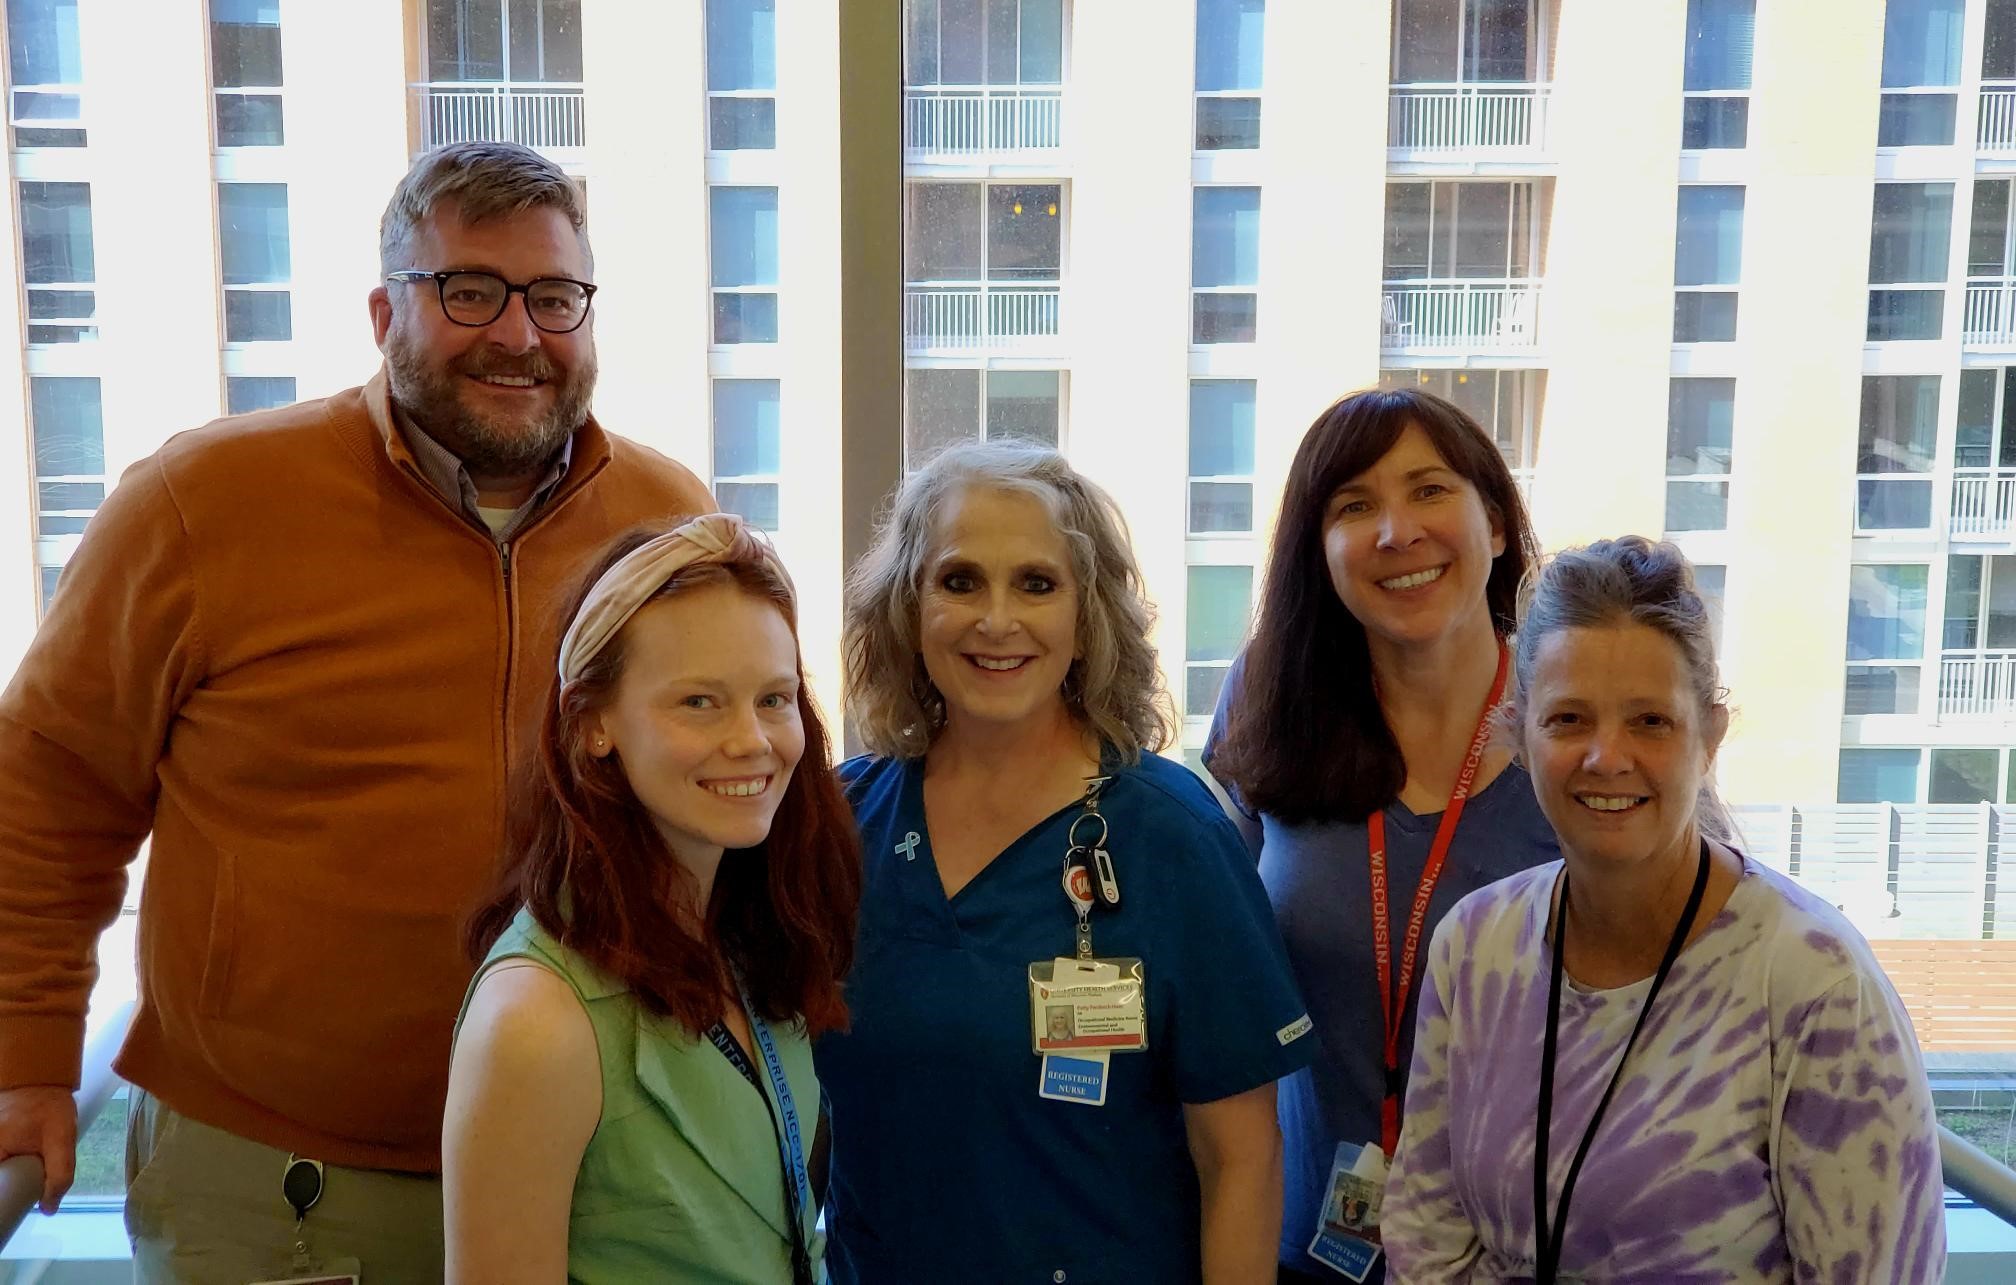 Five people standing in front of a lit window in the daytime wearing nurses scrubs, business casual, tie die. All peple are wearing ID badges and smiling